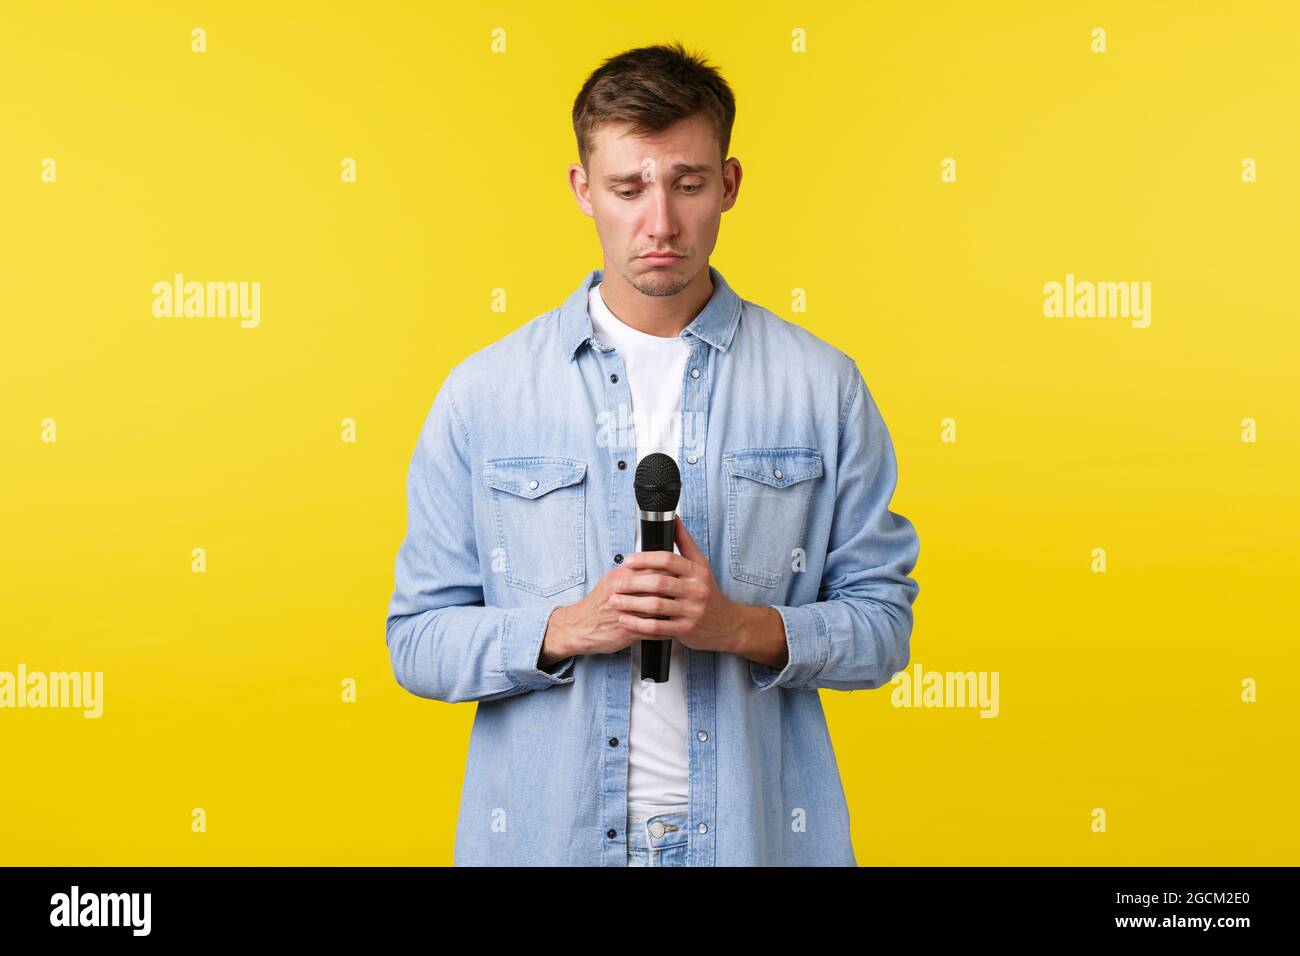 Lifestyle, people emotions and summer leisure concept. Gloomy and grieving, heartbroken blond guy sobbing, looking down uneasy as holding microphone Stock Photo